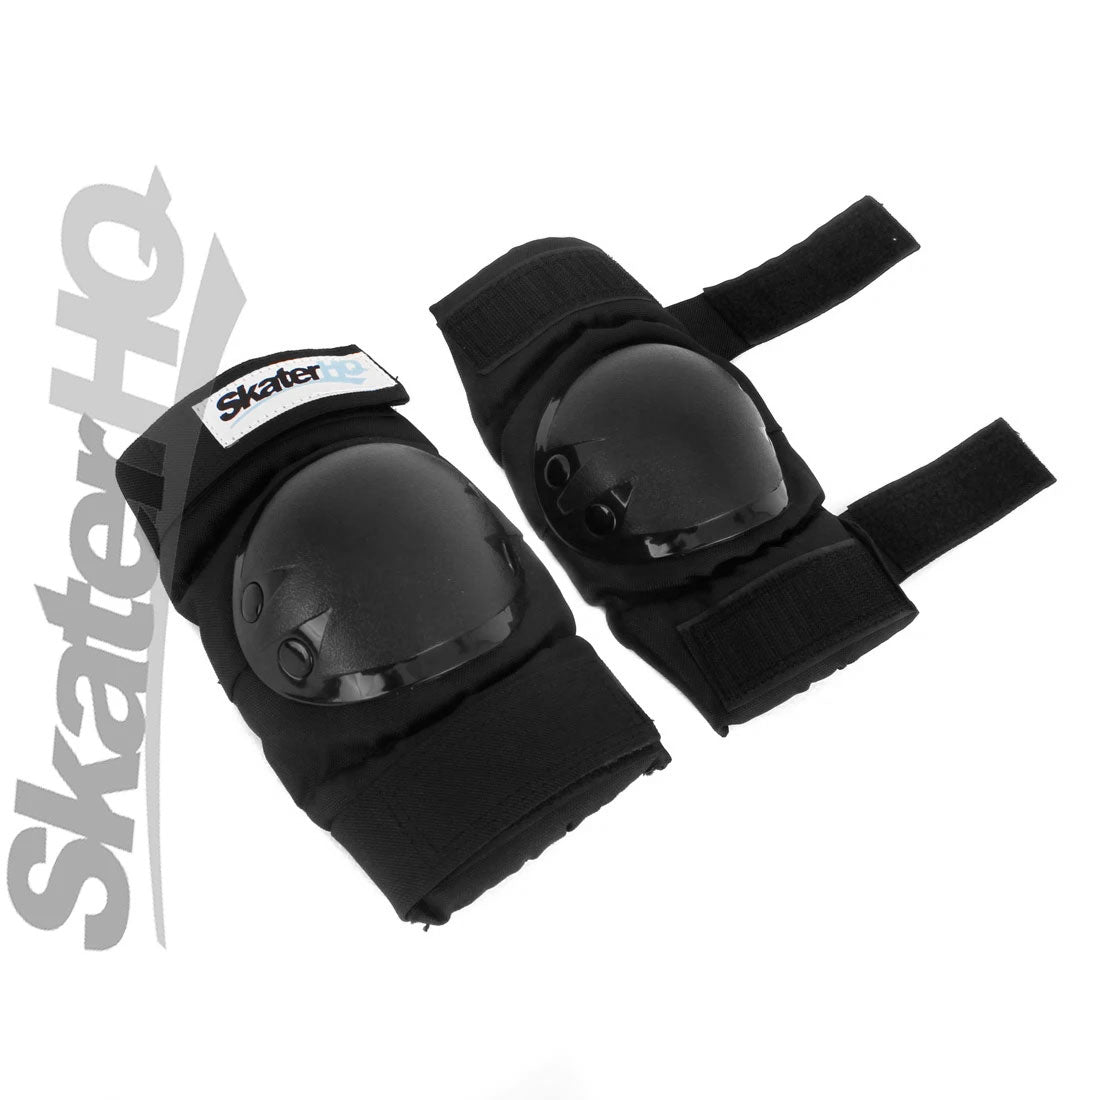 Skater HQ Knee/Elbow Set - Small Protective Gear